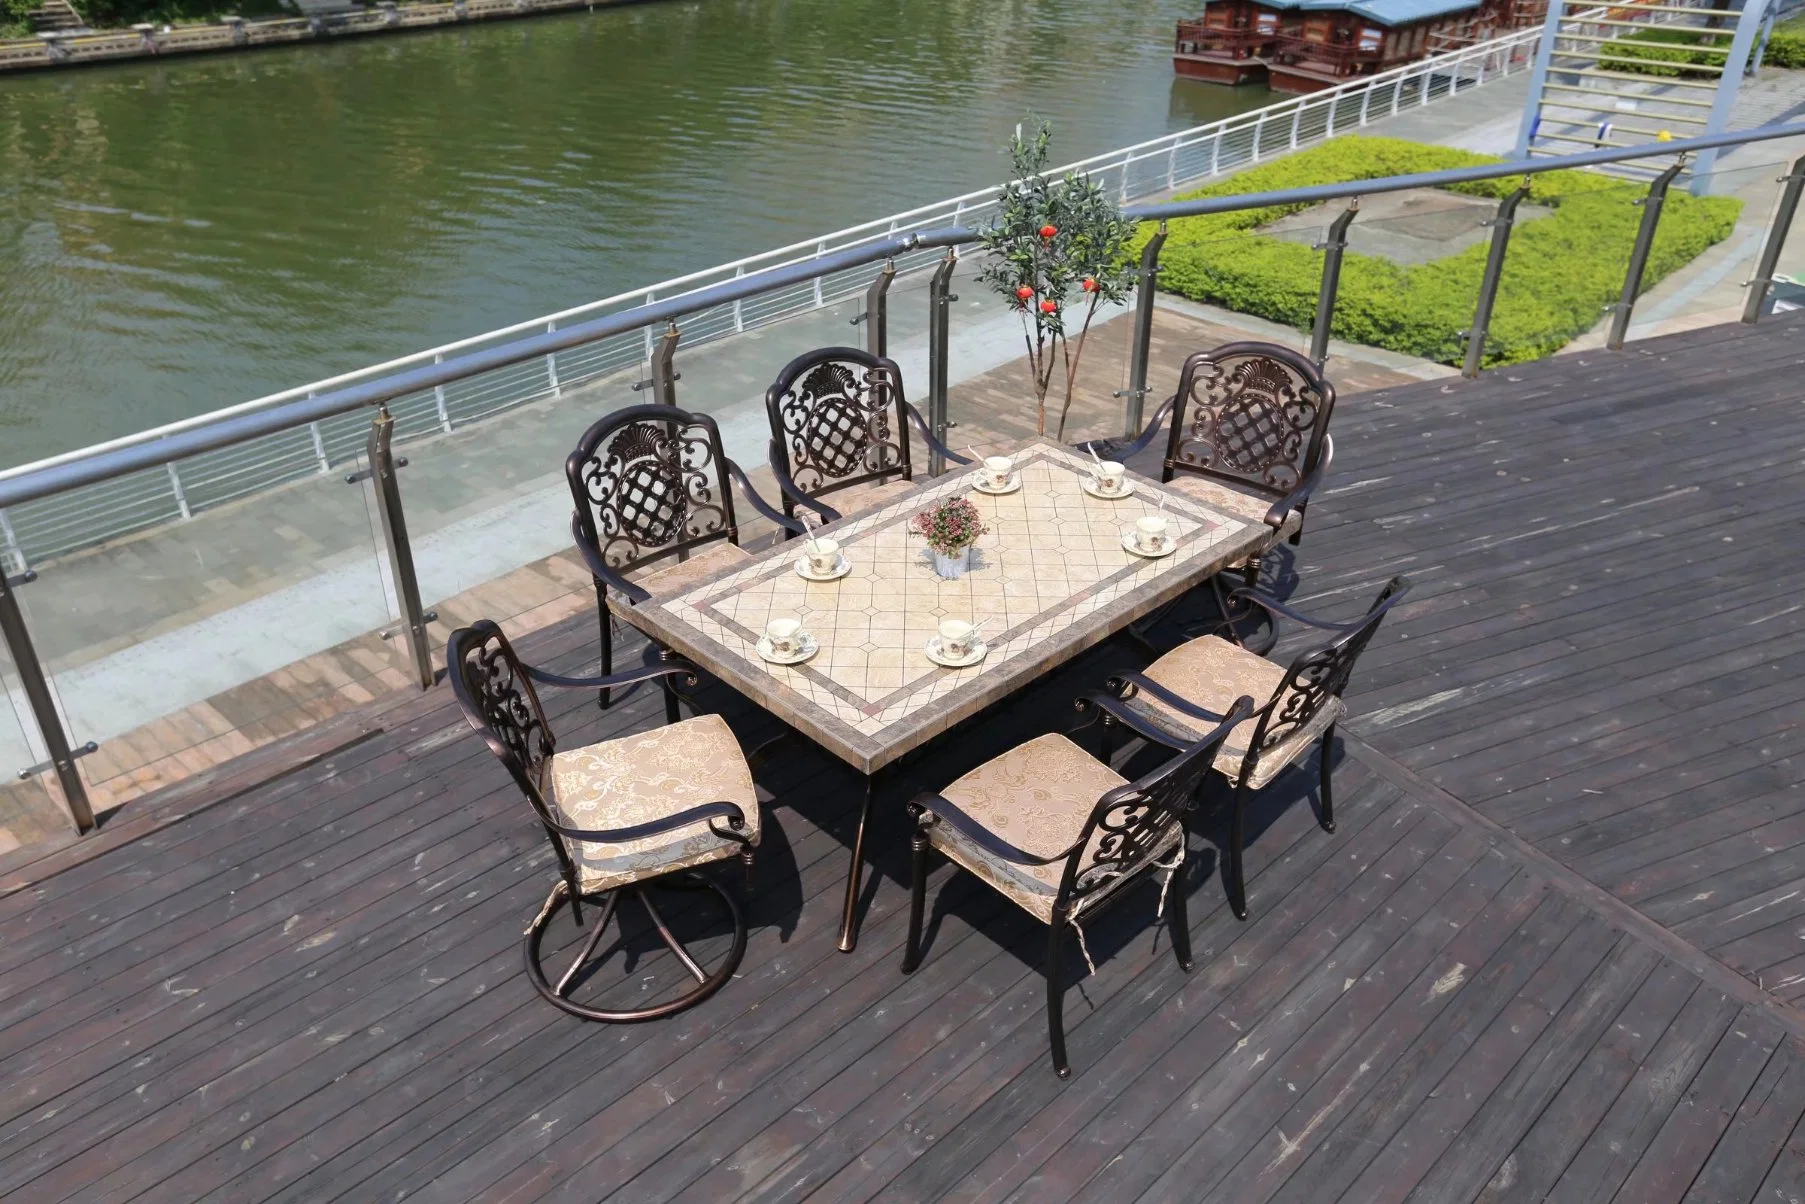 Outdoor Garden Barbecue Tables and Chairs and Home Garden Villa Cast Aluminum Furniture Ceramic Tile Long Balcony